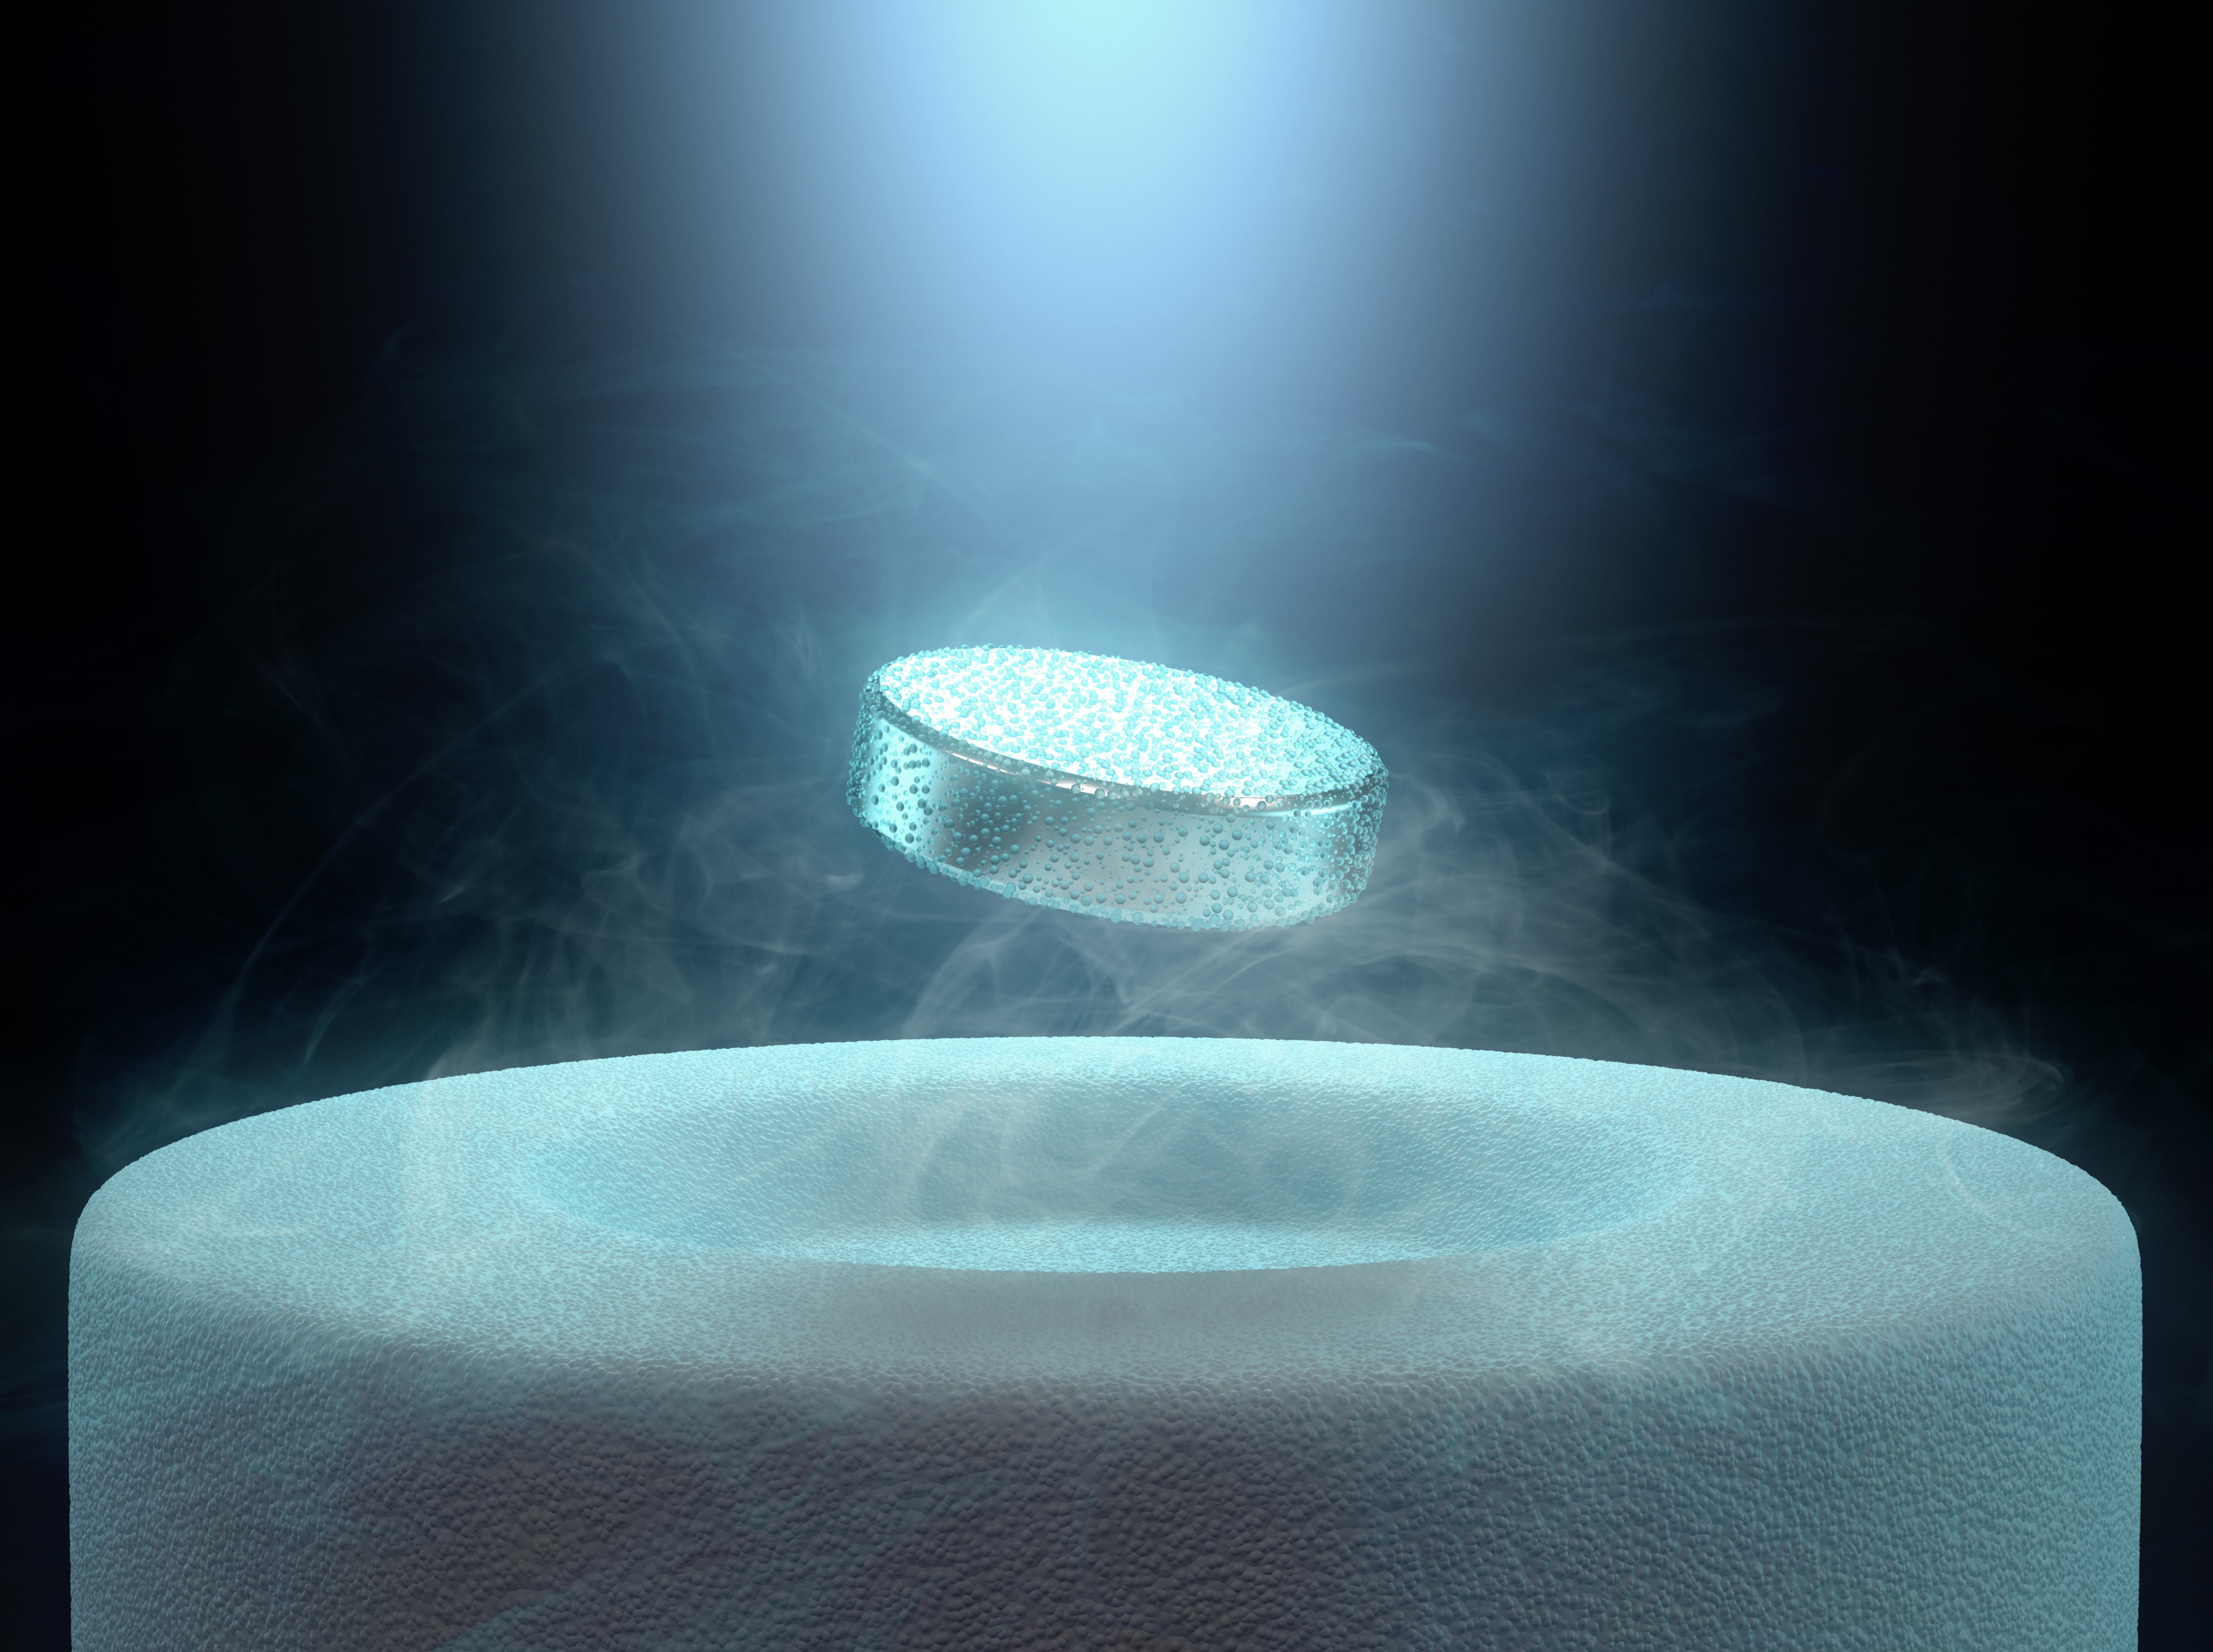 Illustration of a superconductor levitating above a magnet.